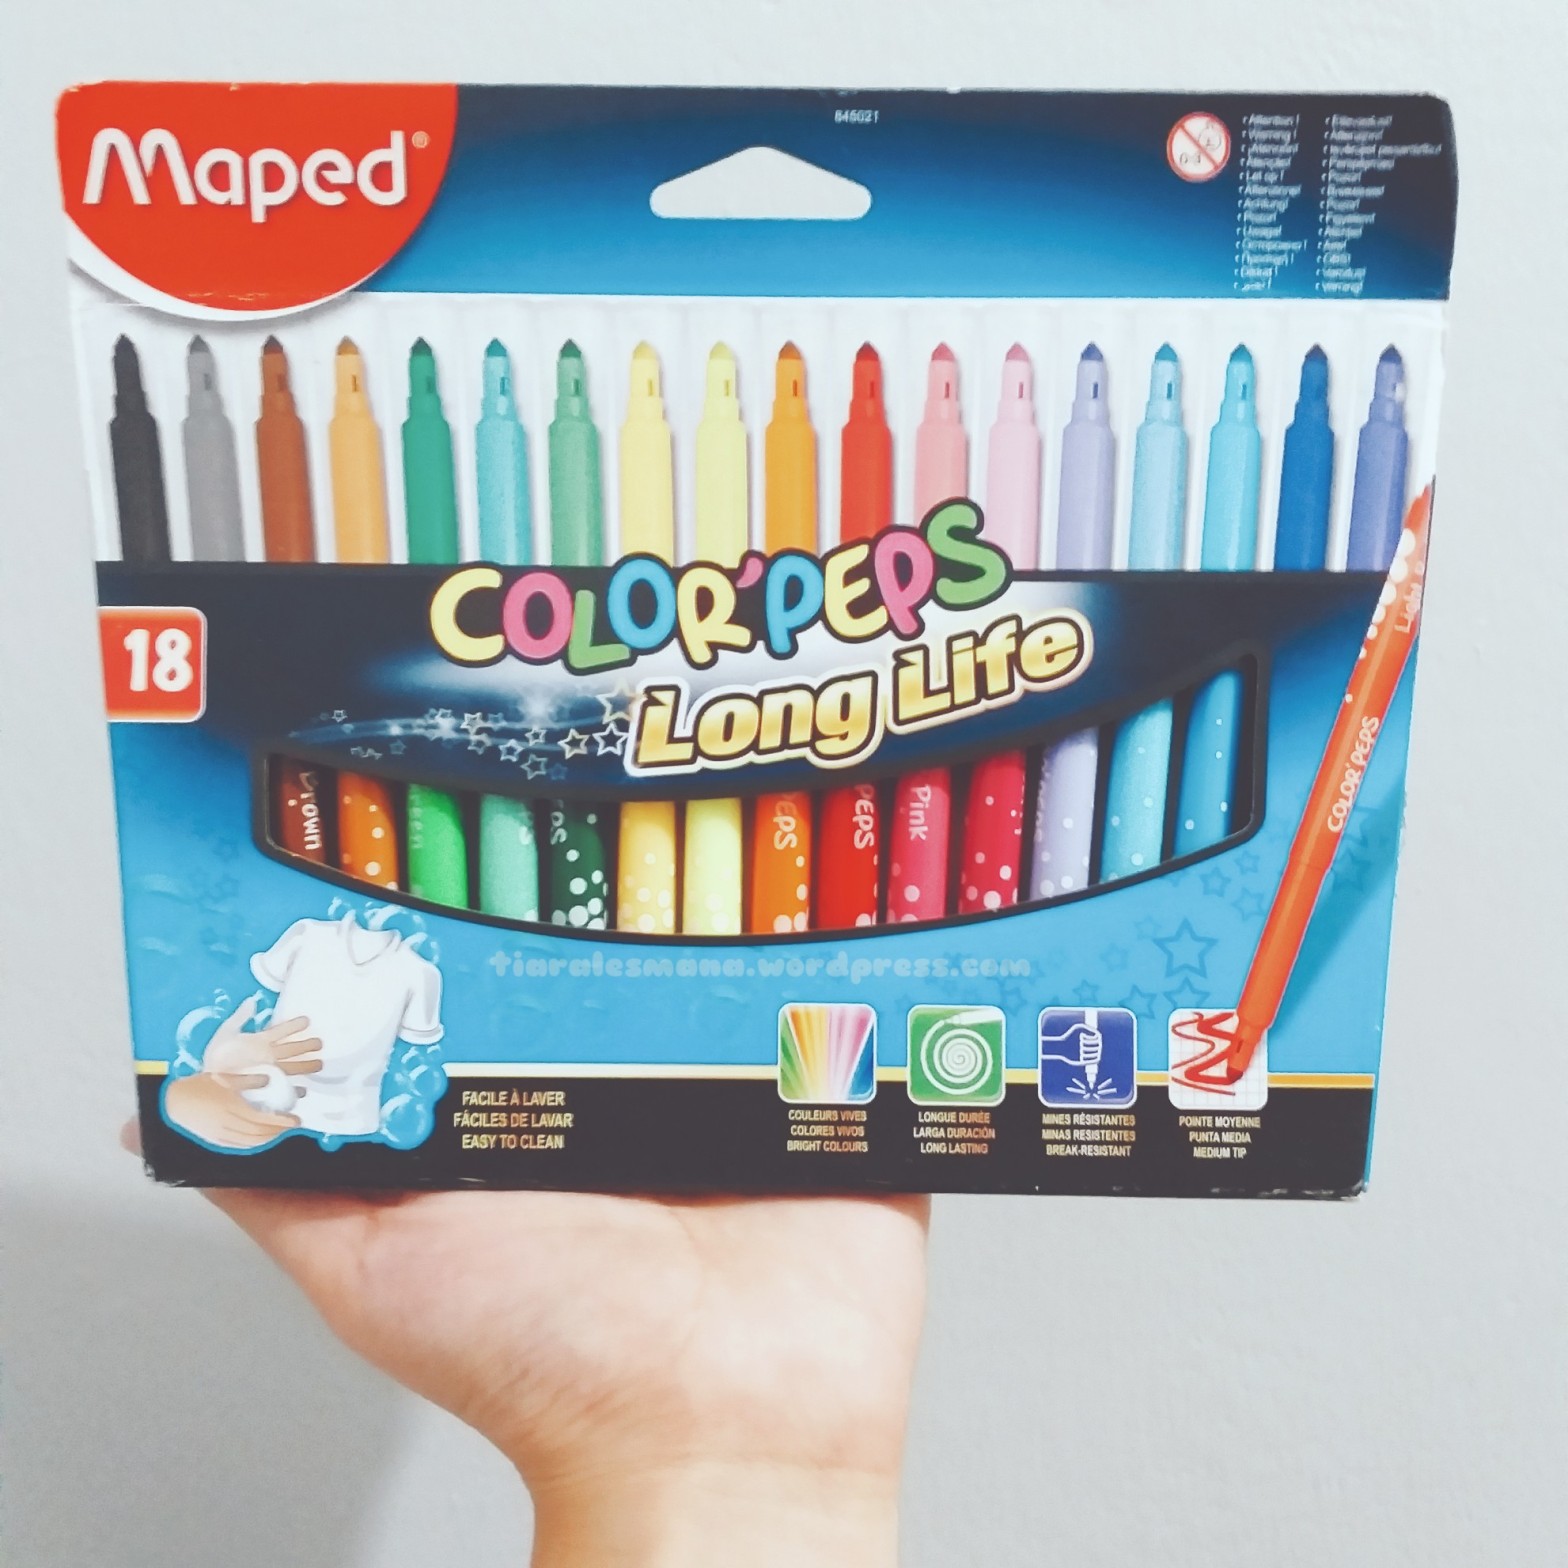 ProductReview: Maped Color'Peps Long Life for Hand Lettering, Yay or Nay? –  i blog therefore i am